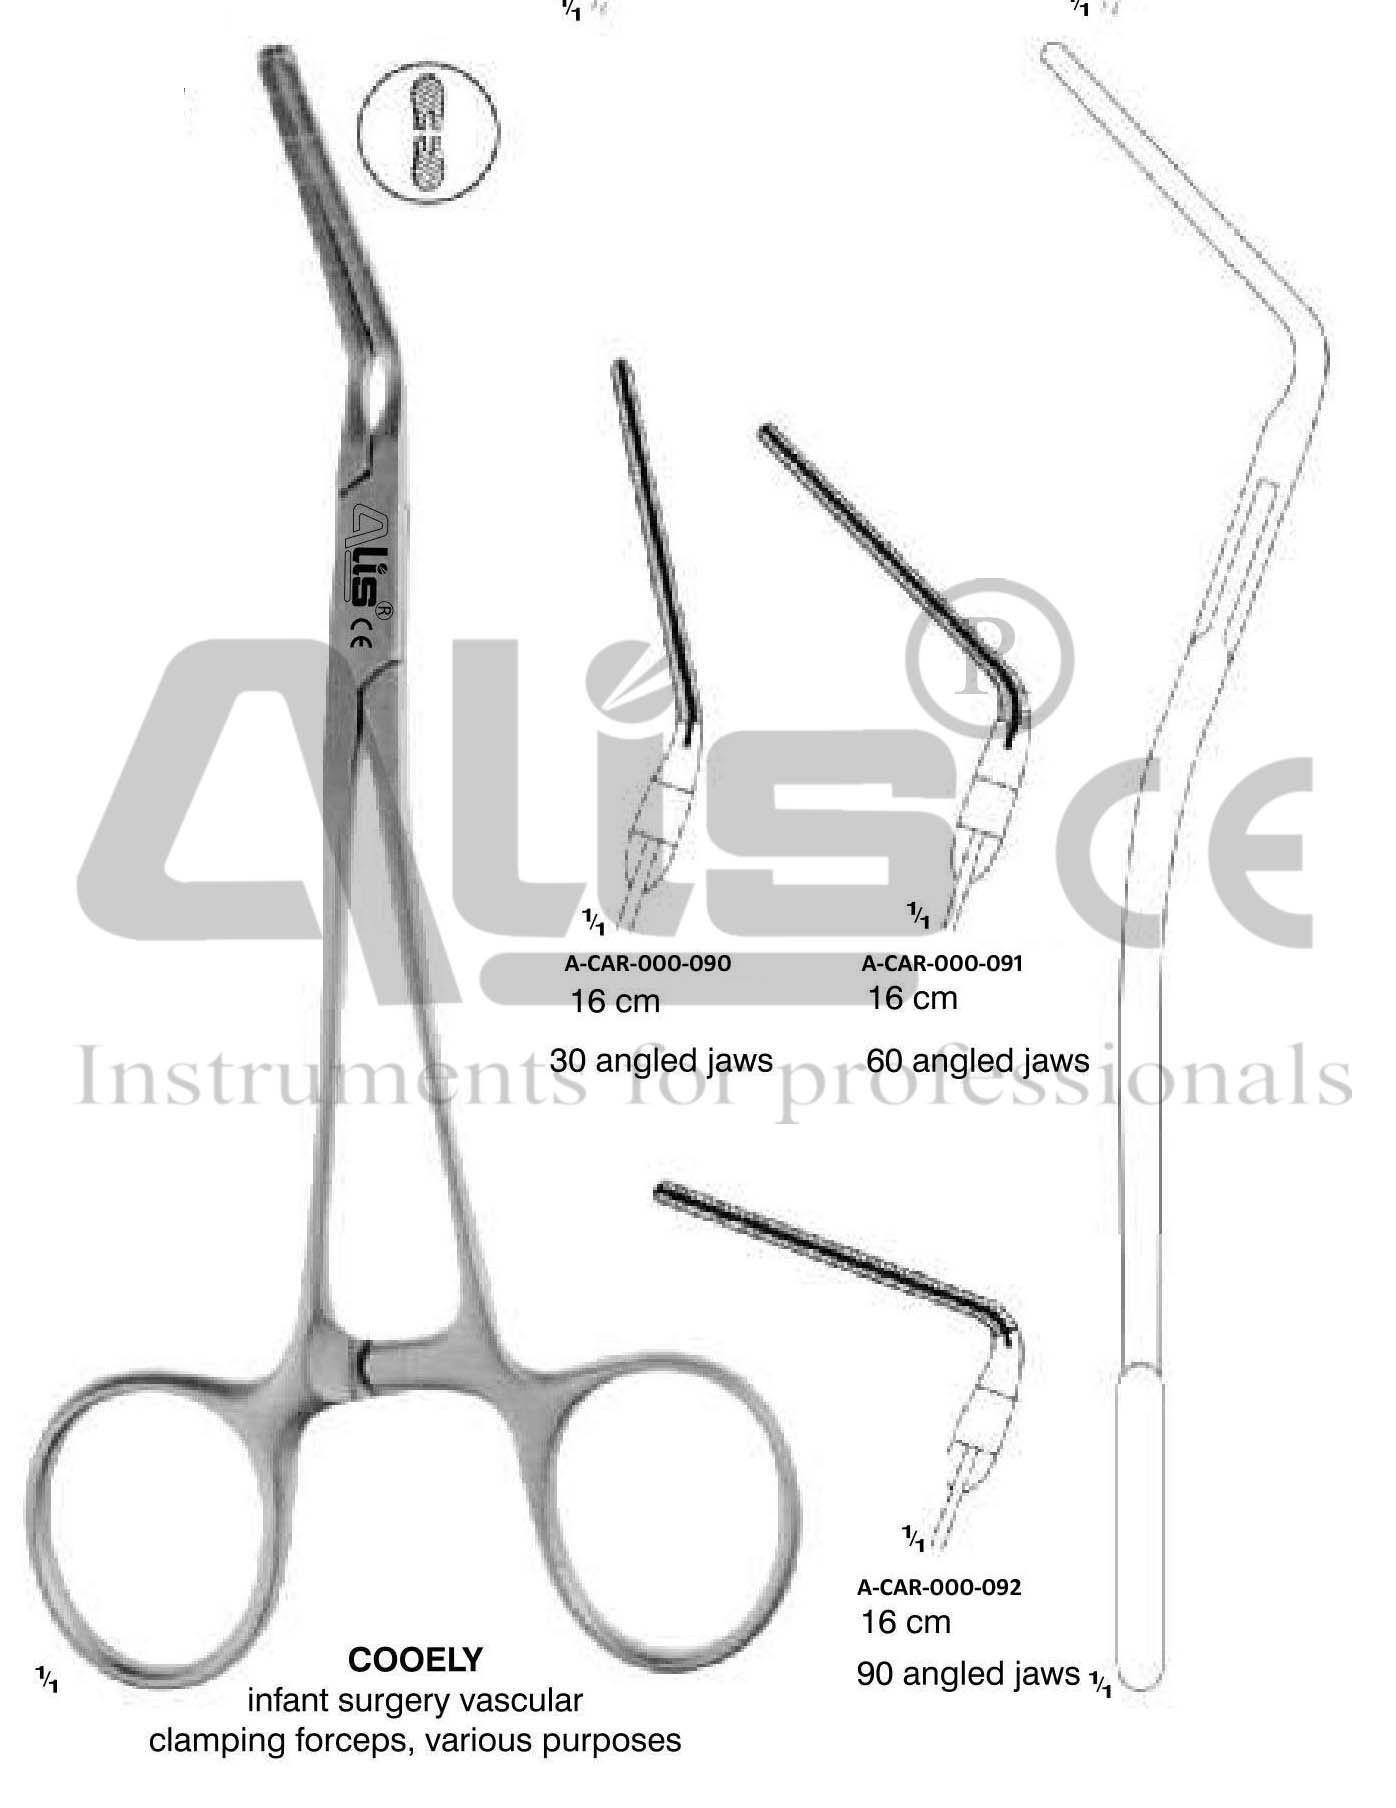 COOLEY INFANT SURGERY VASCULAR CLAMPING FORCEPS VARIOUS PURPOSES